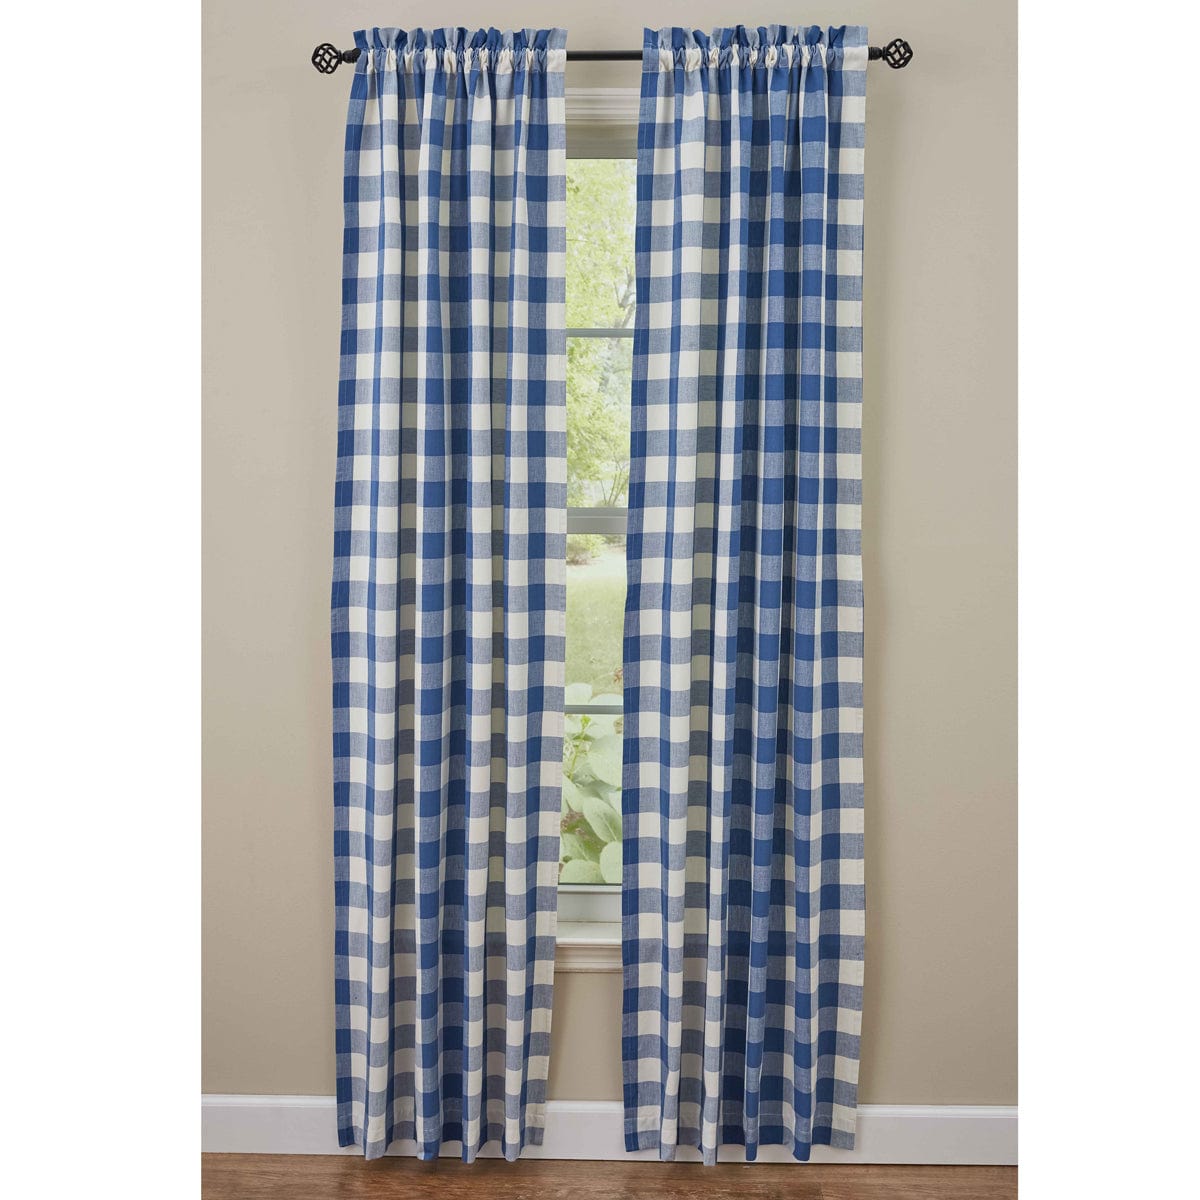 Wicklow Check in China Blue Panel Pair With Tie Backs 84" Long lined-Park Designs-The Village Merchant